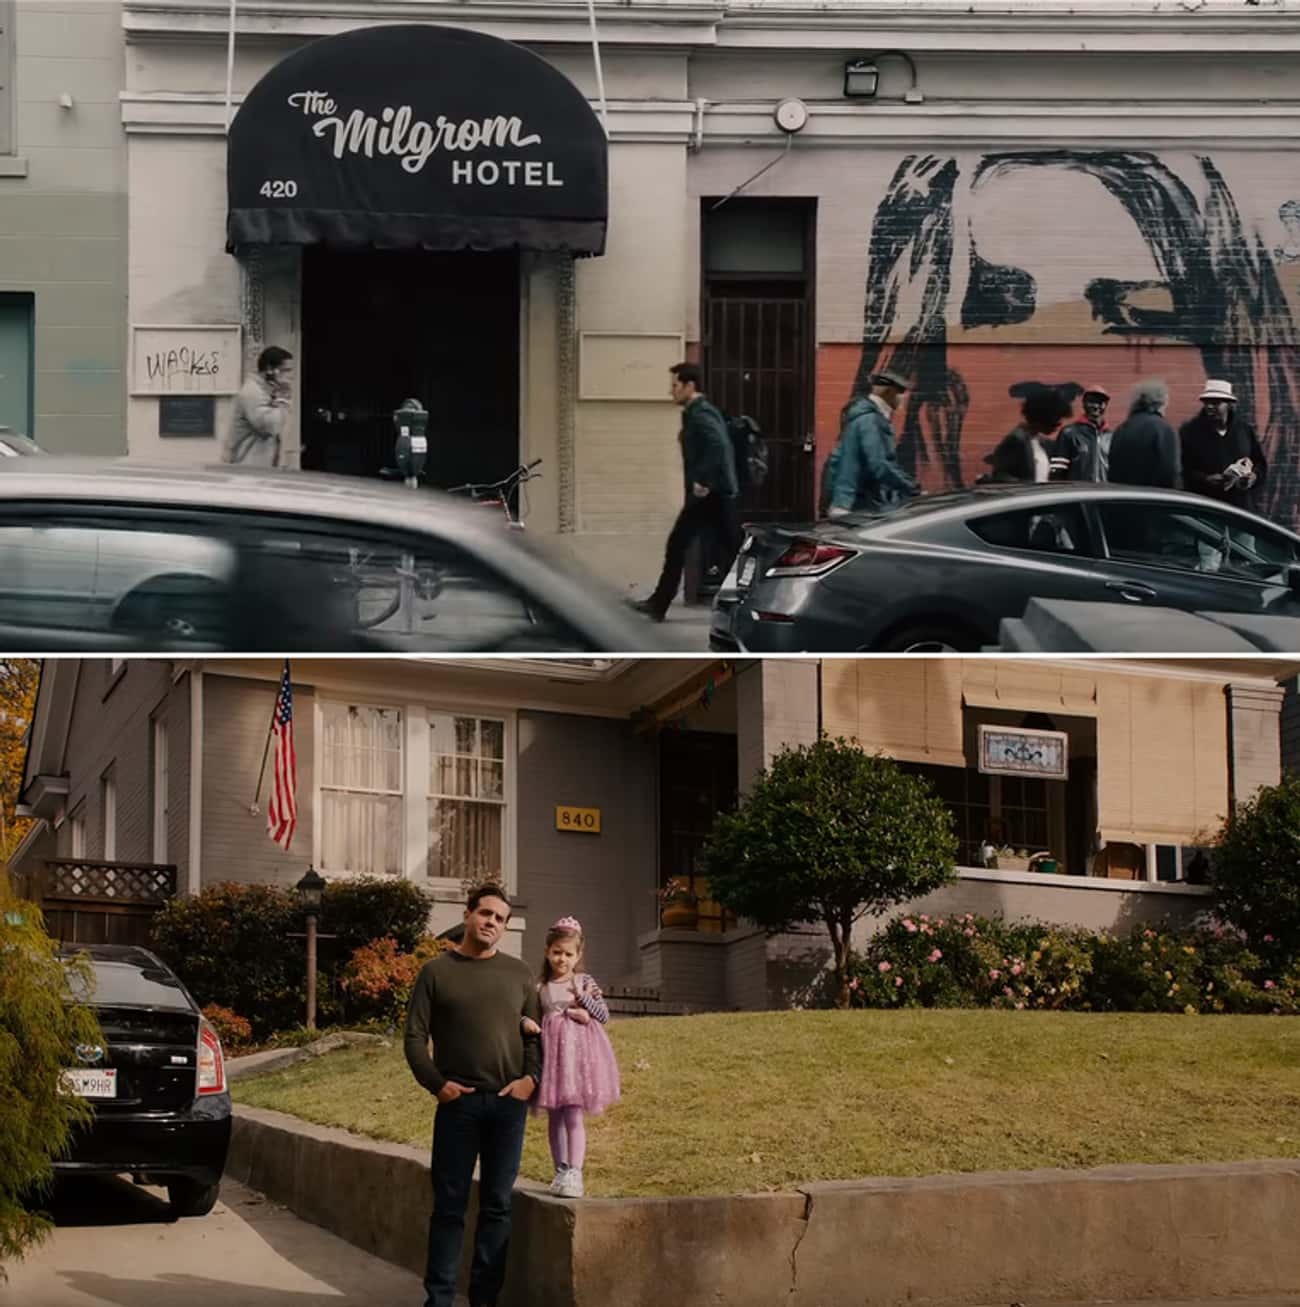 The address on Scott Lang's 'halfway house' #420 is literally half of his family's house #840.